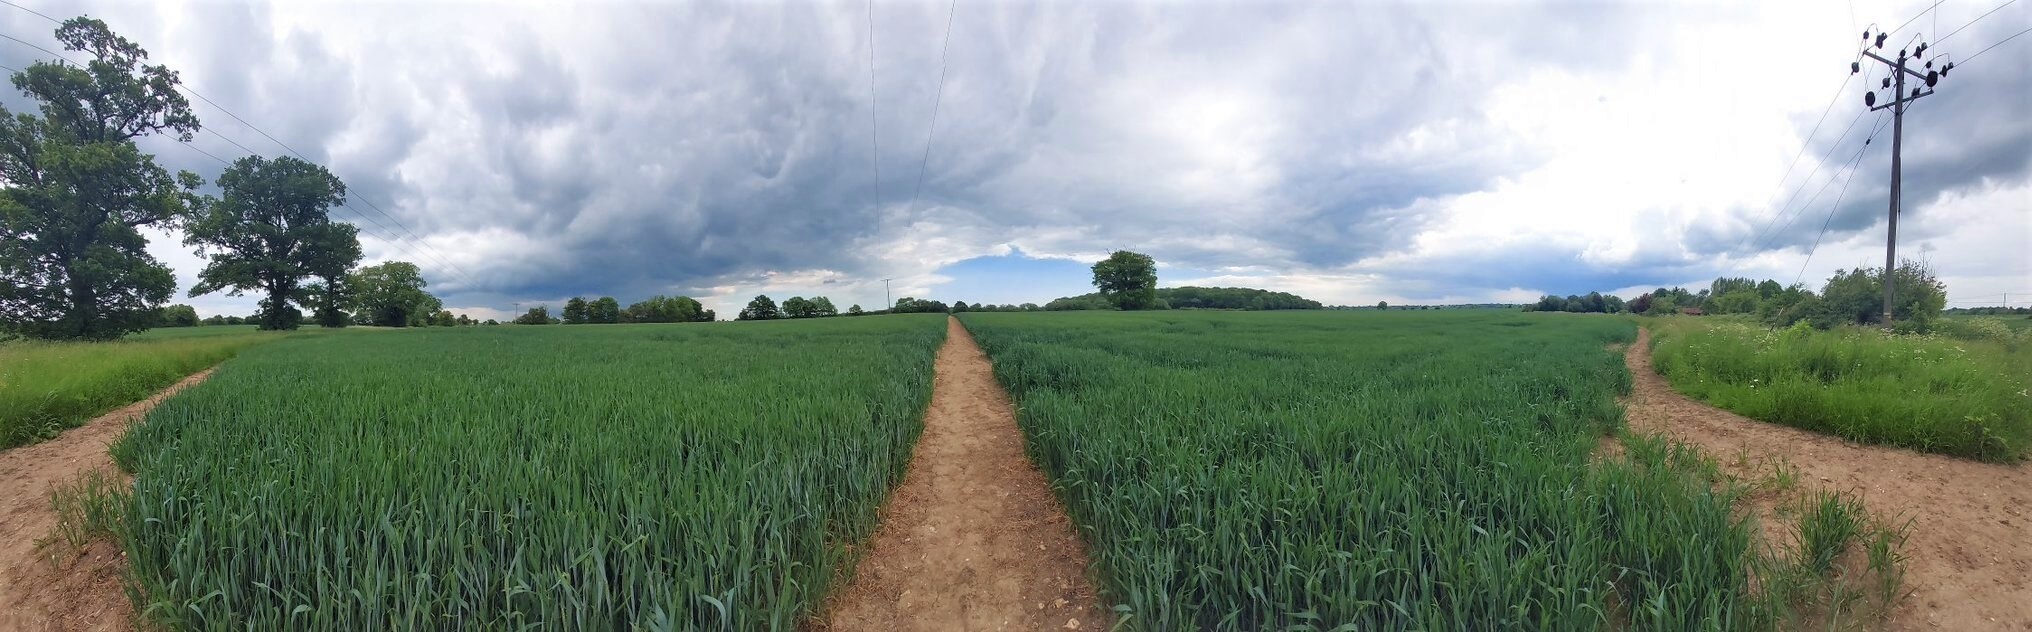 A panoramic photograph of a green field of long grass or wheat, lined with pylons, with a dramatic cloudy sky overhead